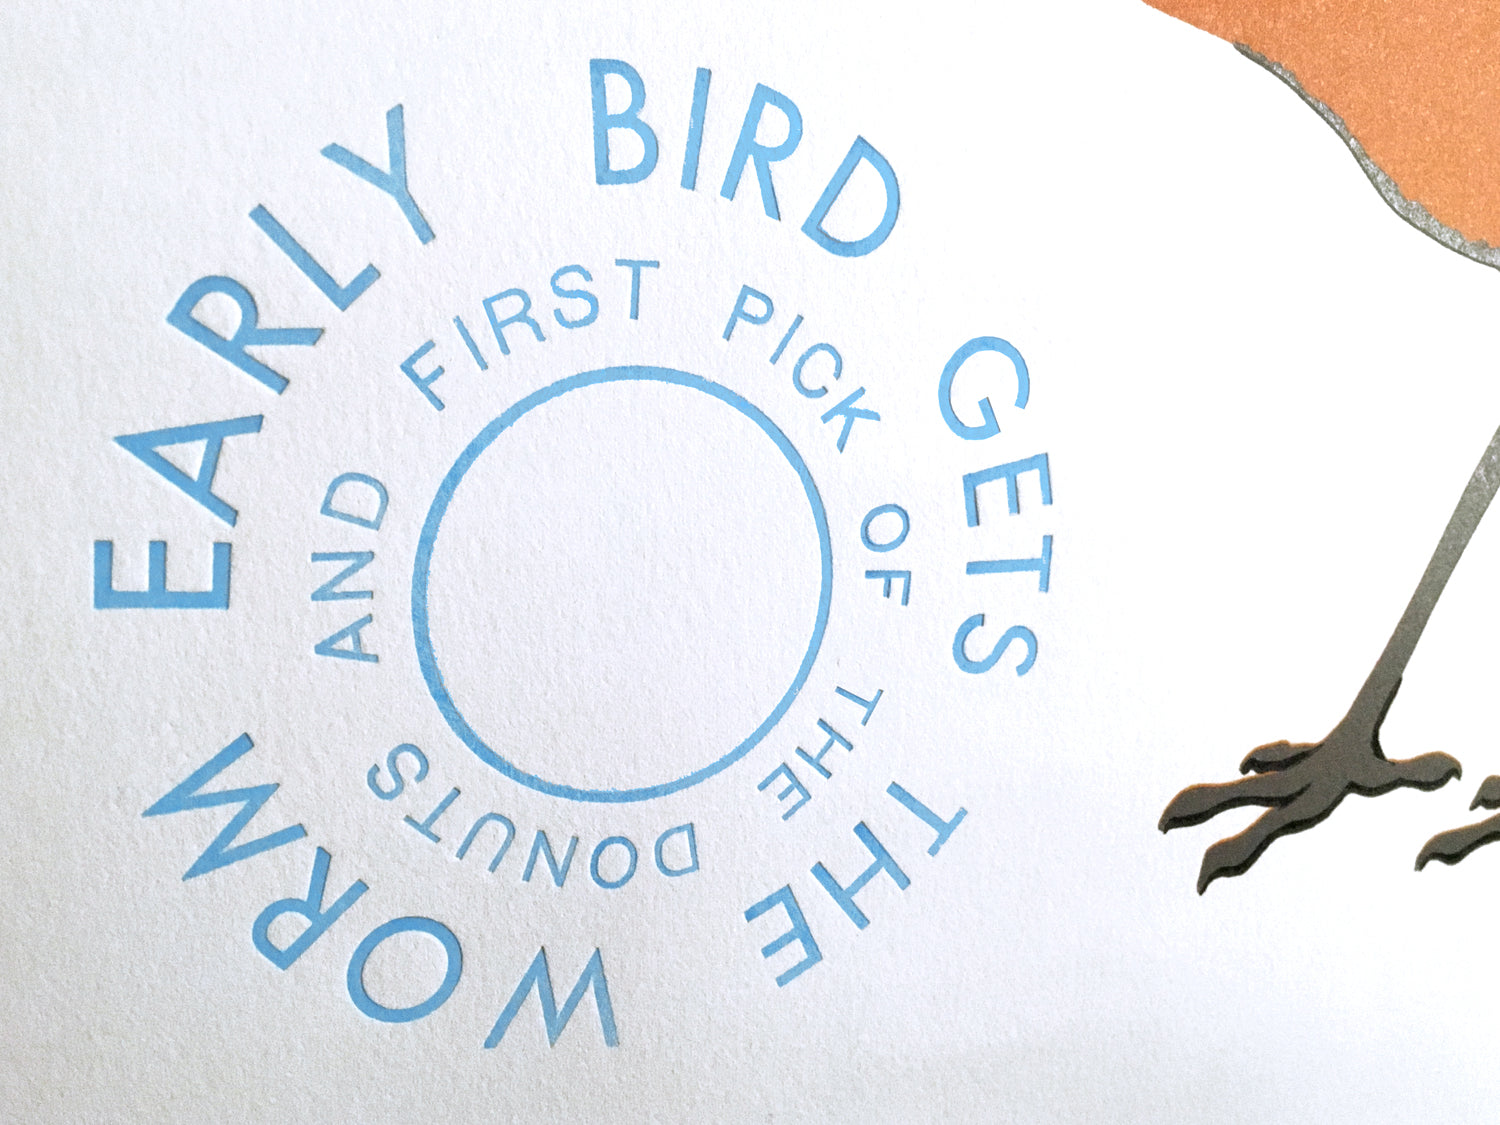 detail of the text that reads: EARLY BIRD GETS THE WORM AND FIRST PICK OF THE DONUTS" the detail also shows the impression the text made in to the soft paper it was printed on